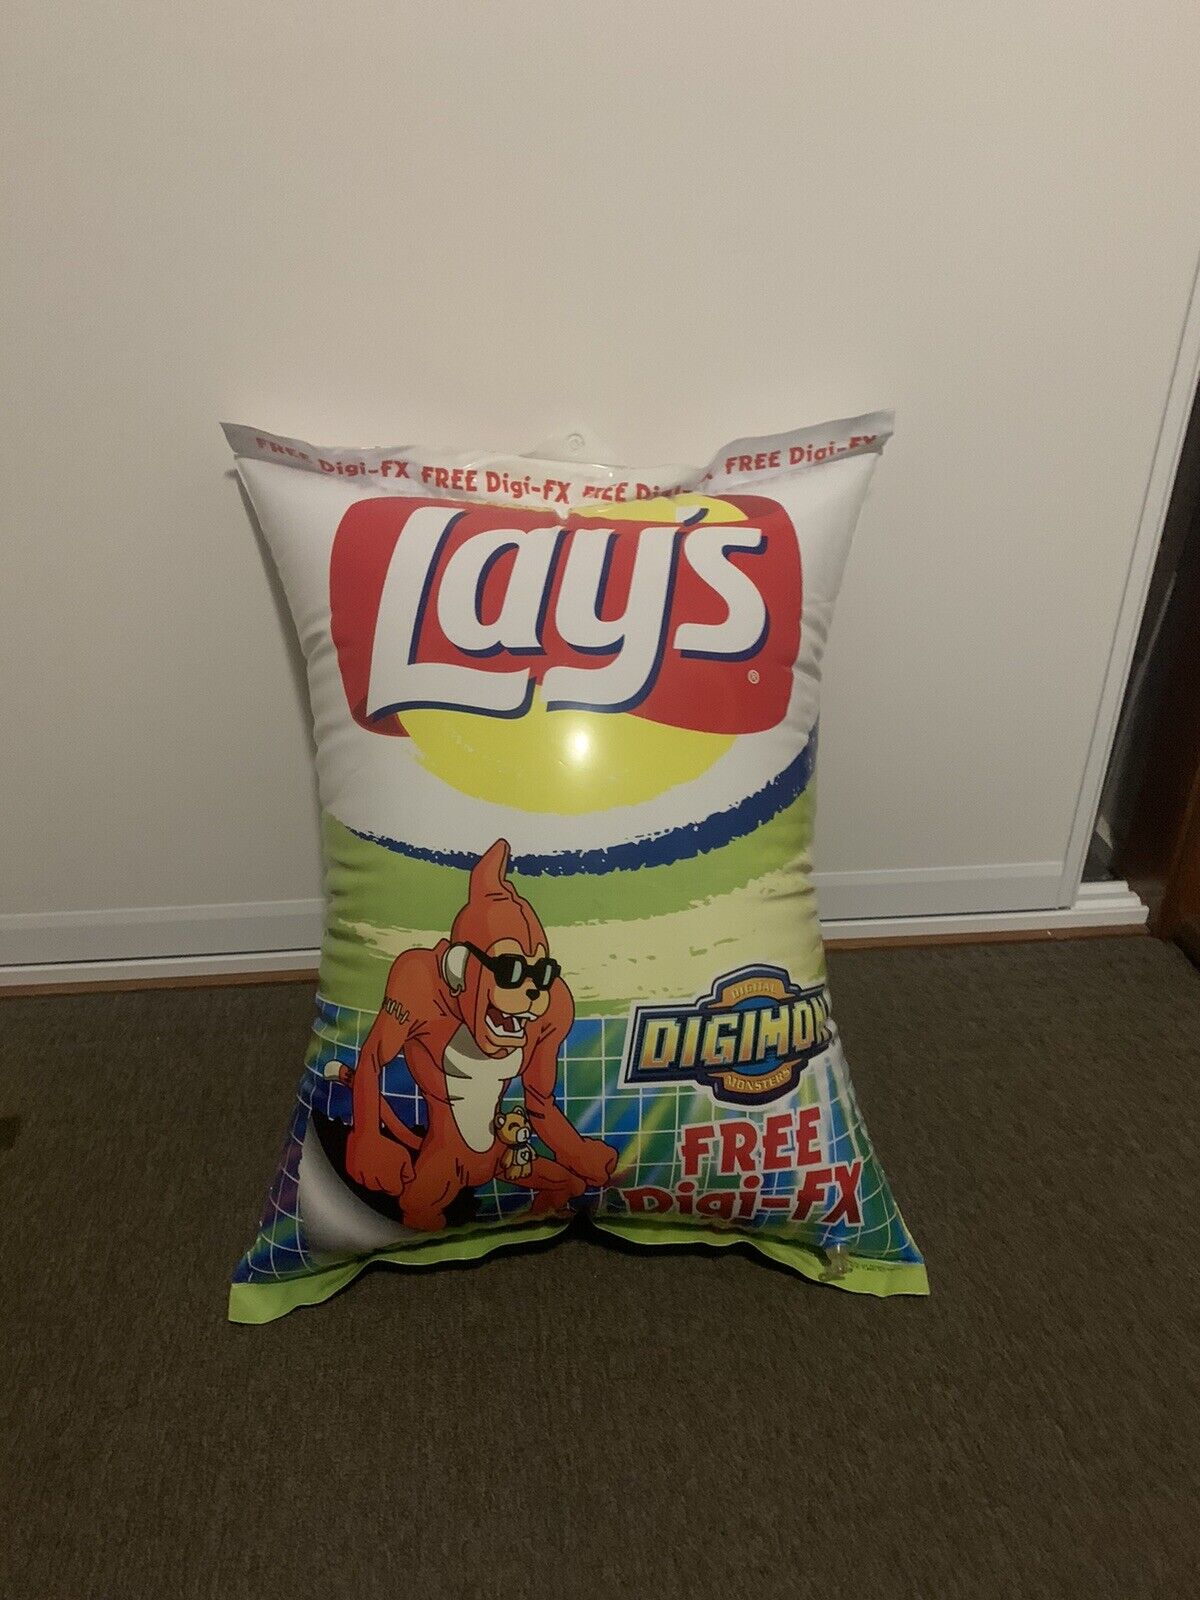 2000 Lays PROMO: Digimon Store Display - DIGI-FX - Inflatable Lays Chip Packet